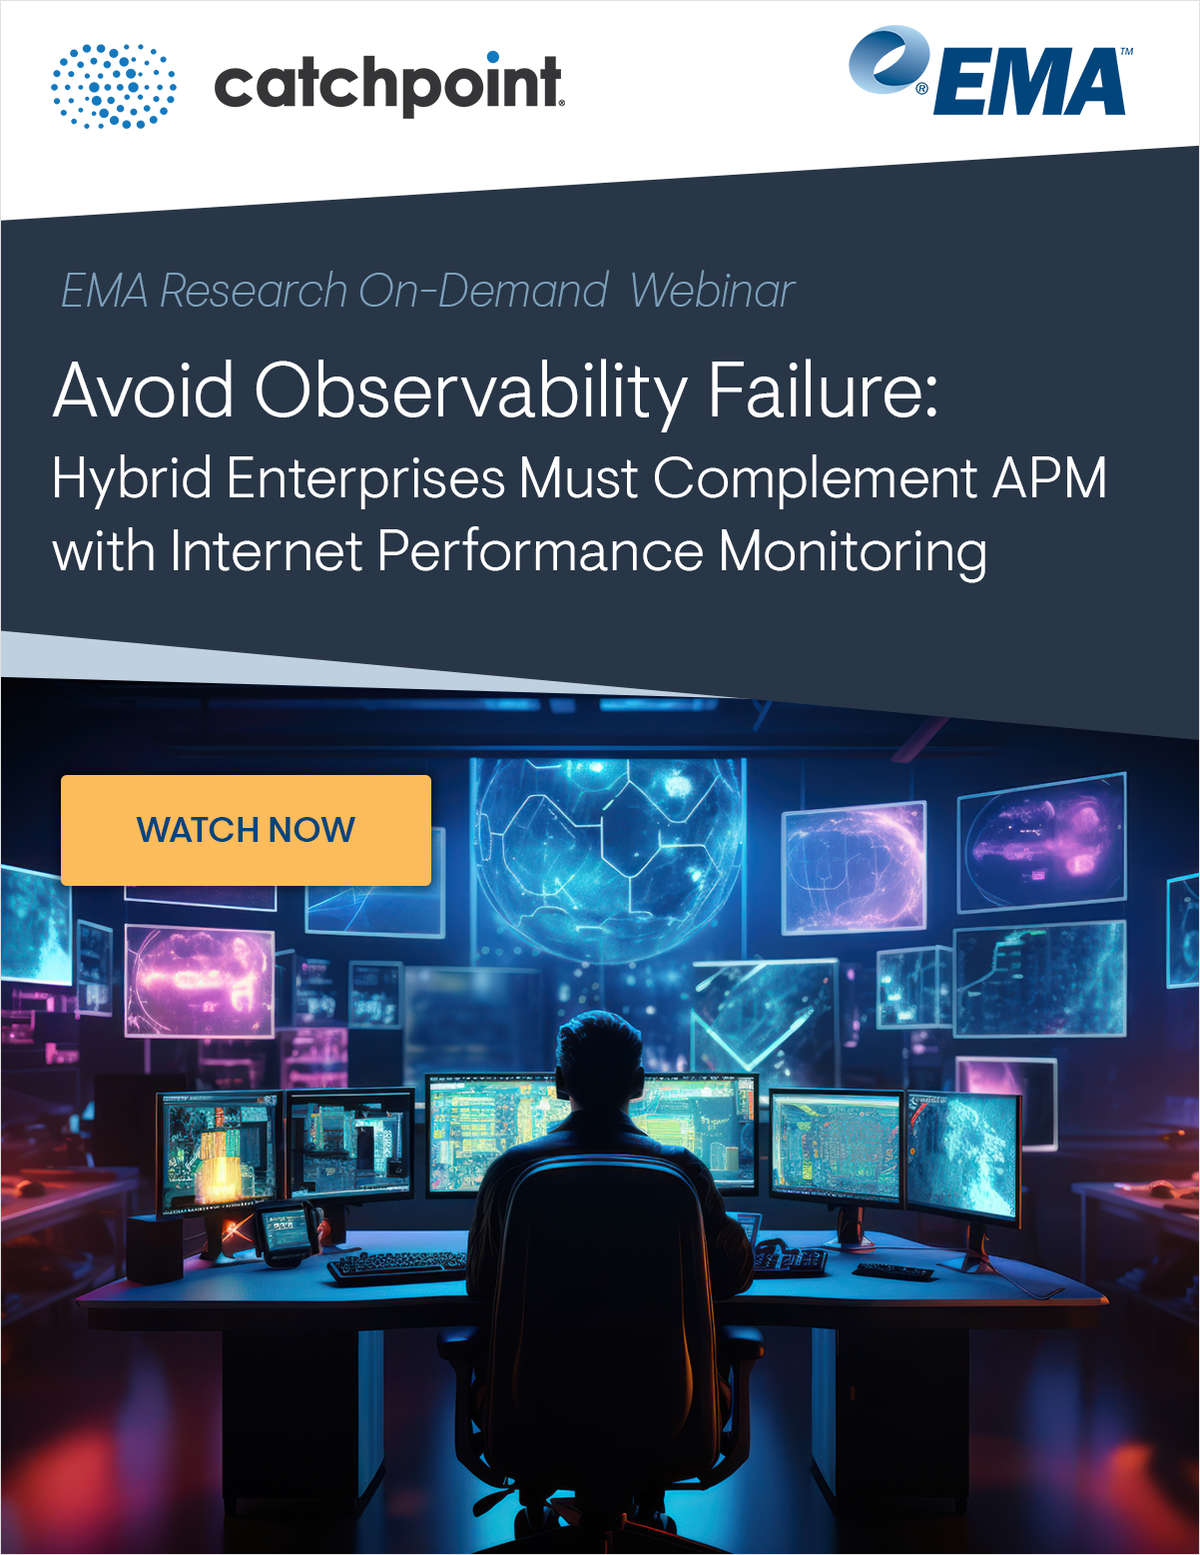 [On-Demand Research Webinar] Avoid Observability Failure: Hybrid Enterprises Must Complement APM with Internet Performance Monitoring